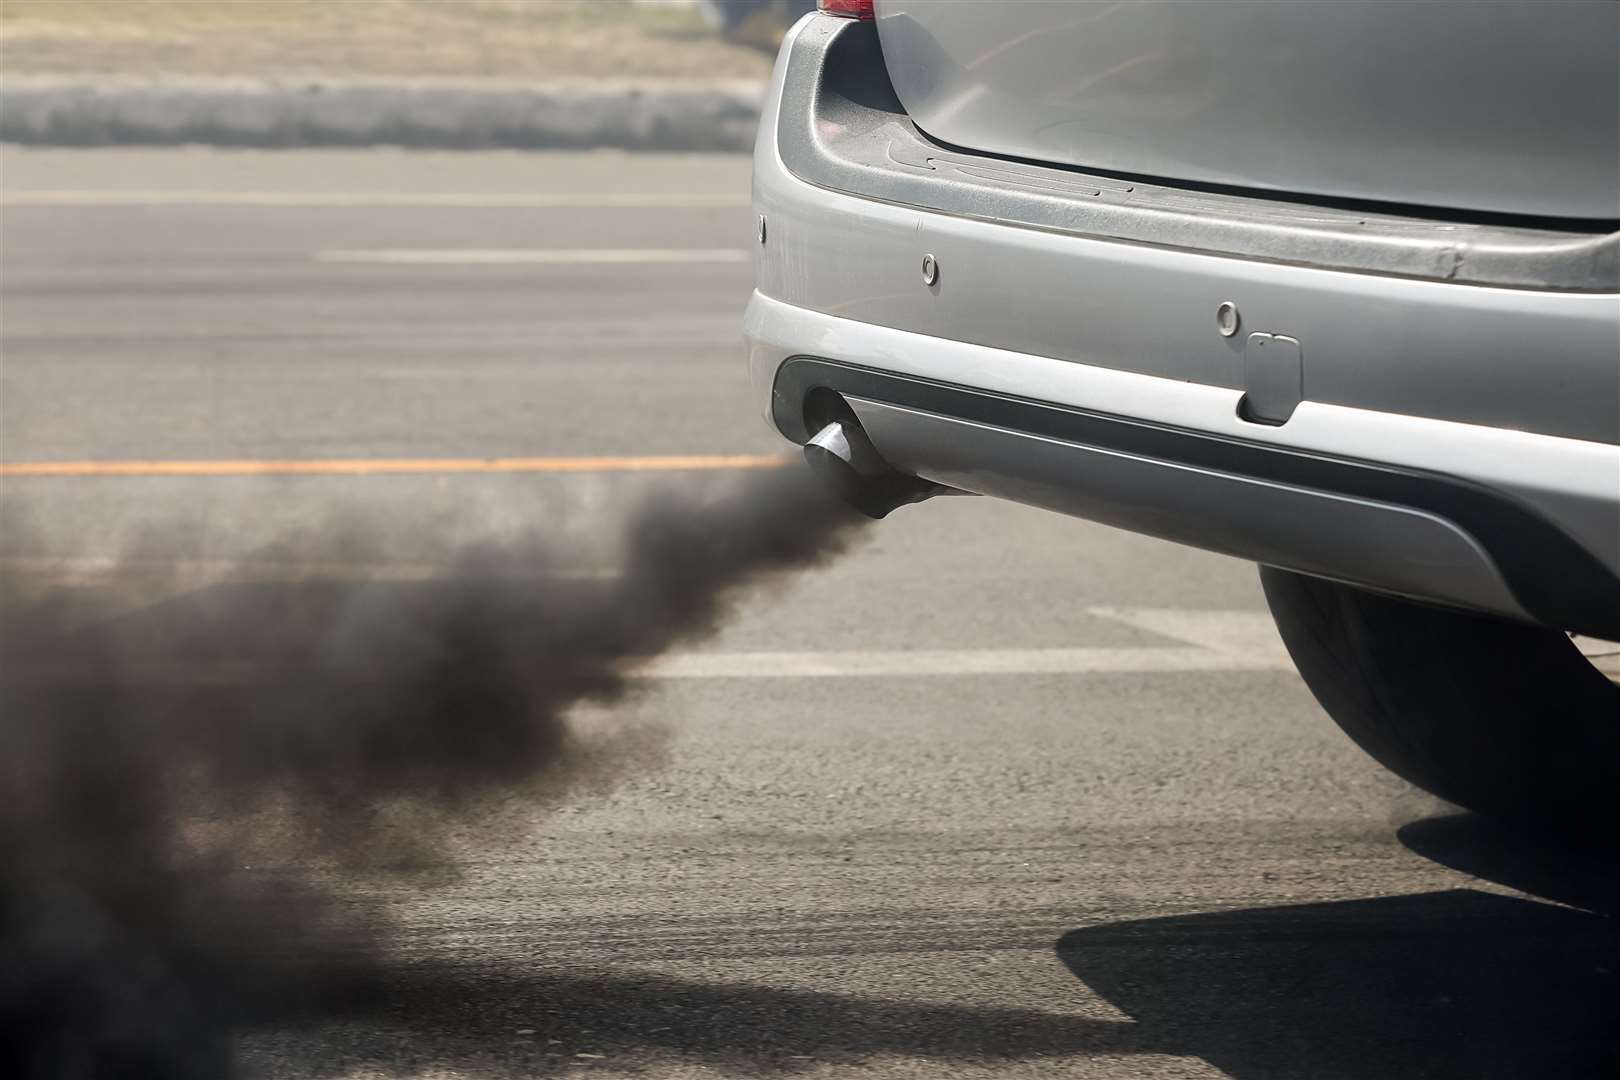 Dr Julian Spinks said people who walk or cycle along busy roads also suffer the effects of air pollution from the cars around them. Stock Image